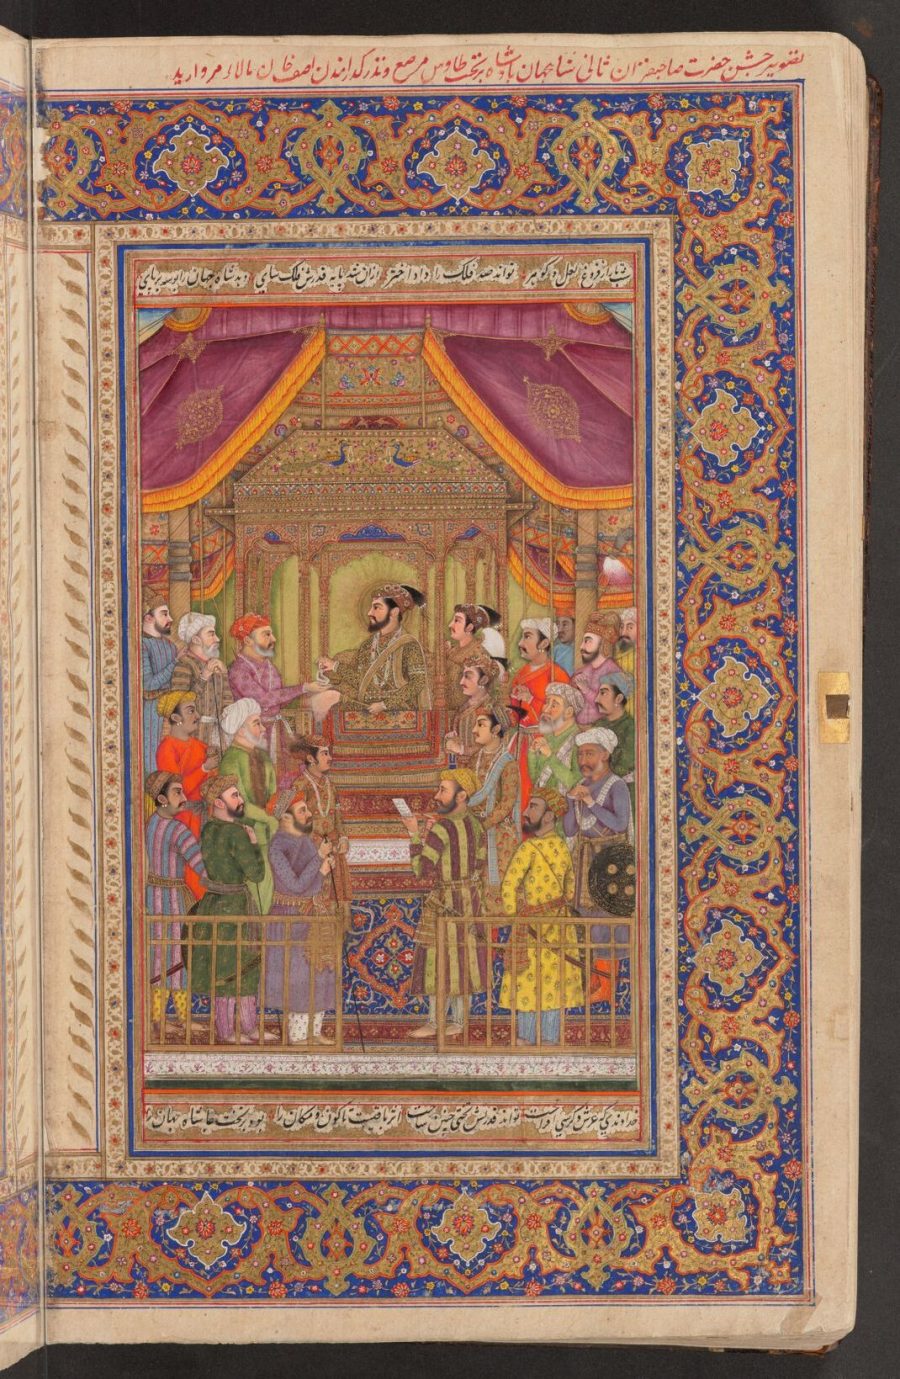 700 Years of Persian Manuscripts Now Digitized and Available Online